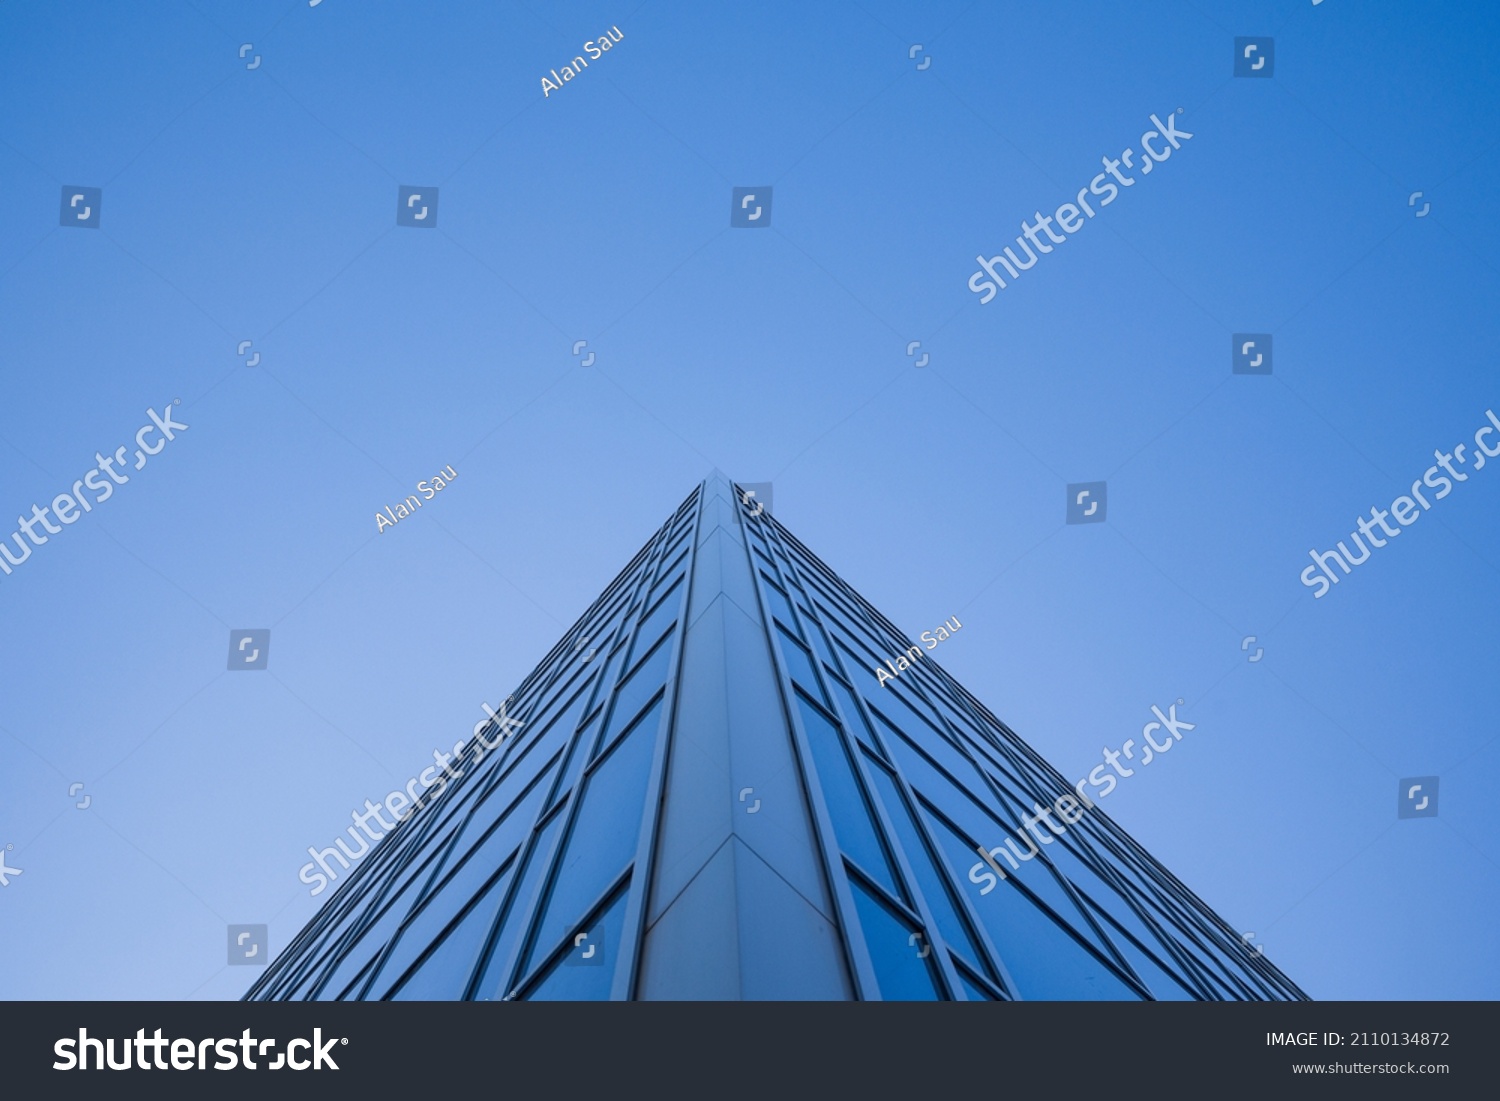 Low angle view of glass facade of tall office building against clear blue sky #2110134872